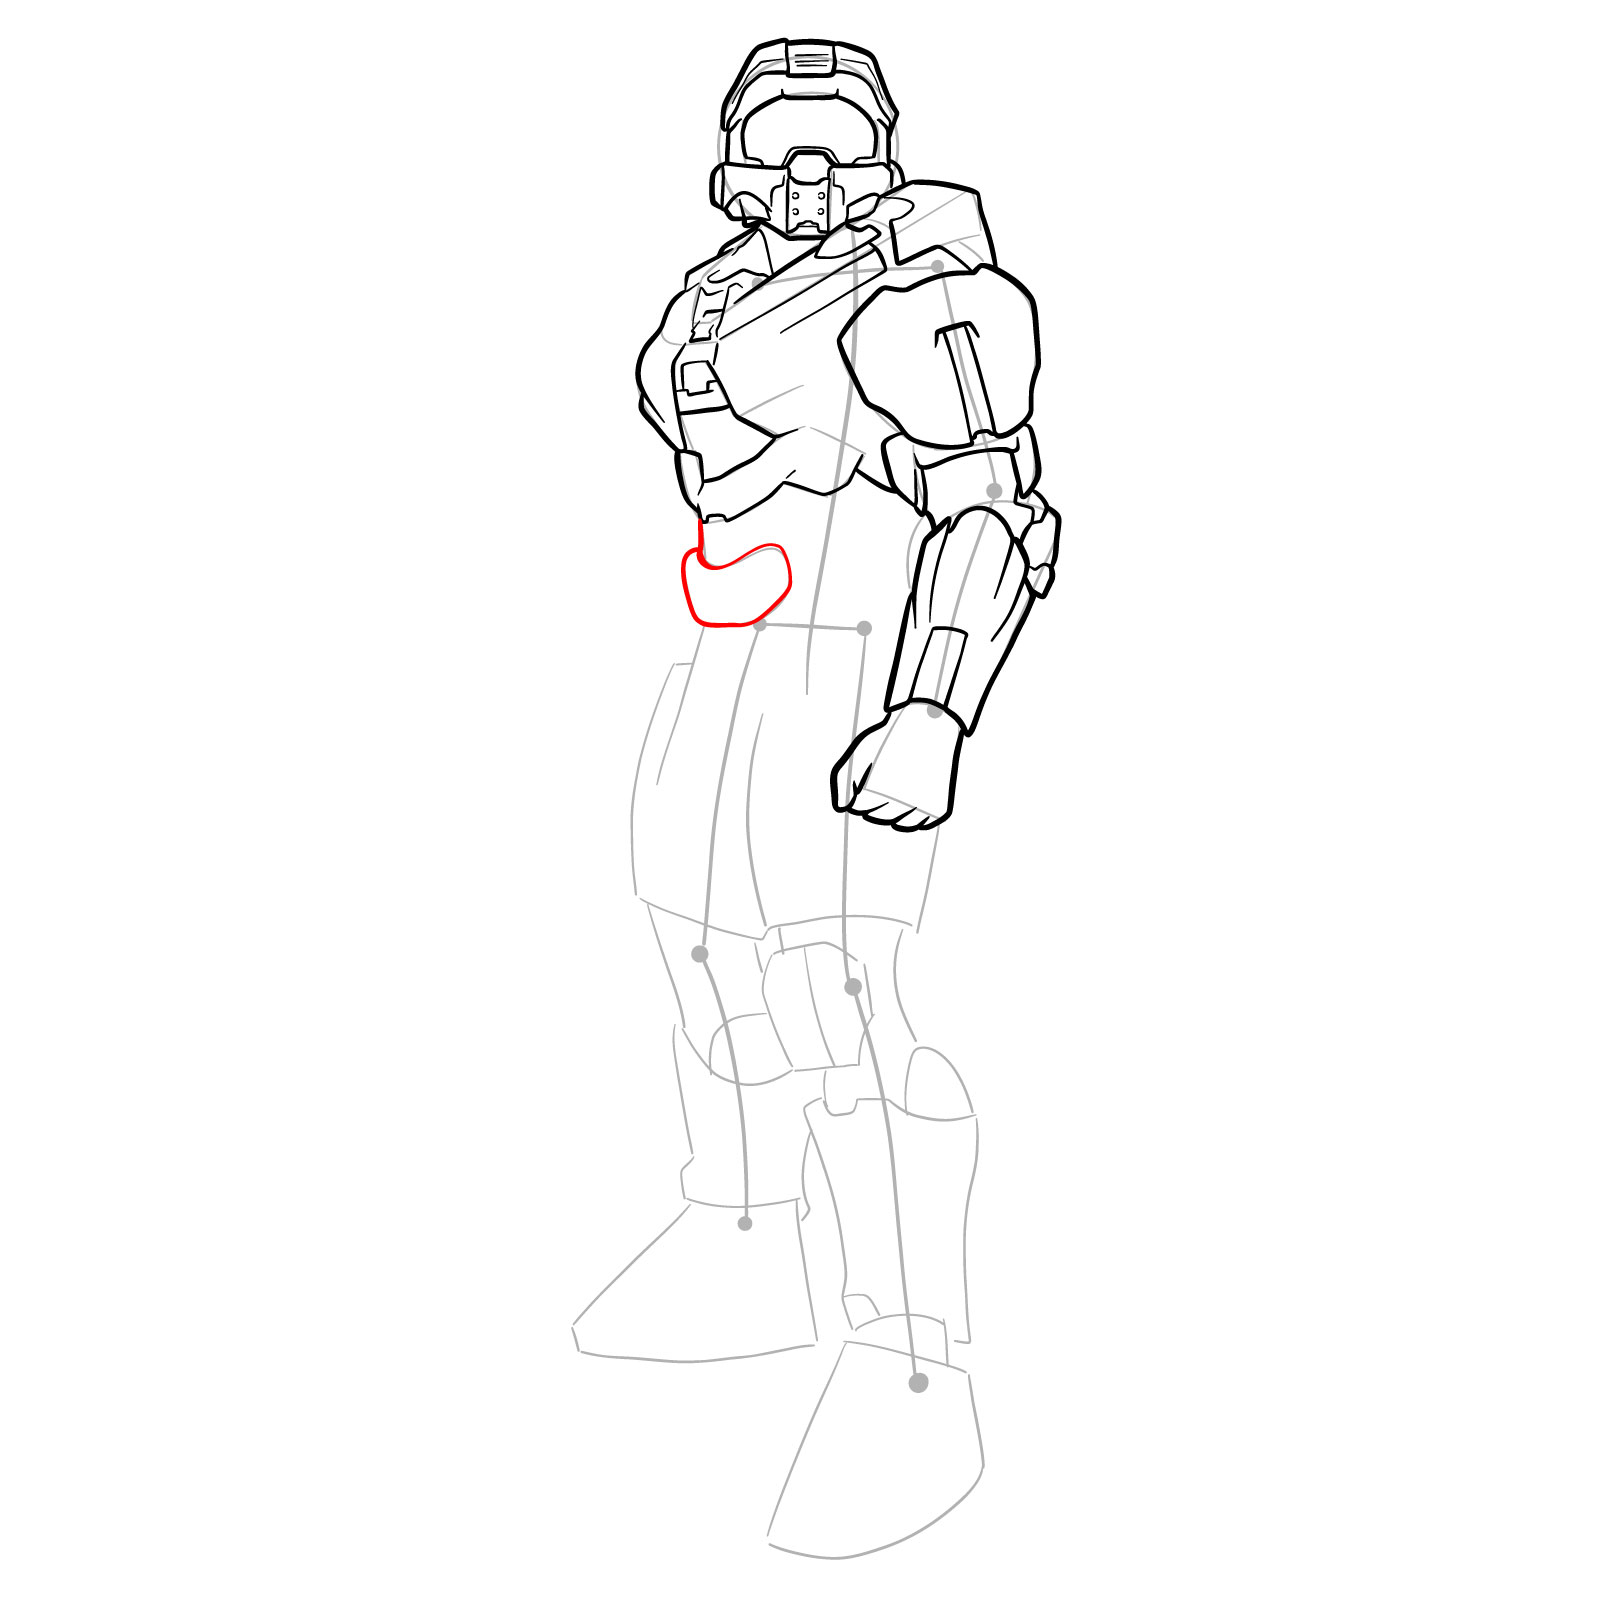 How to Draw Master Chief Petty Officer John-117 - step 22